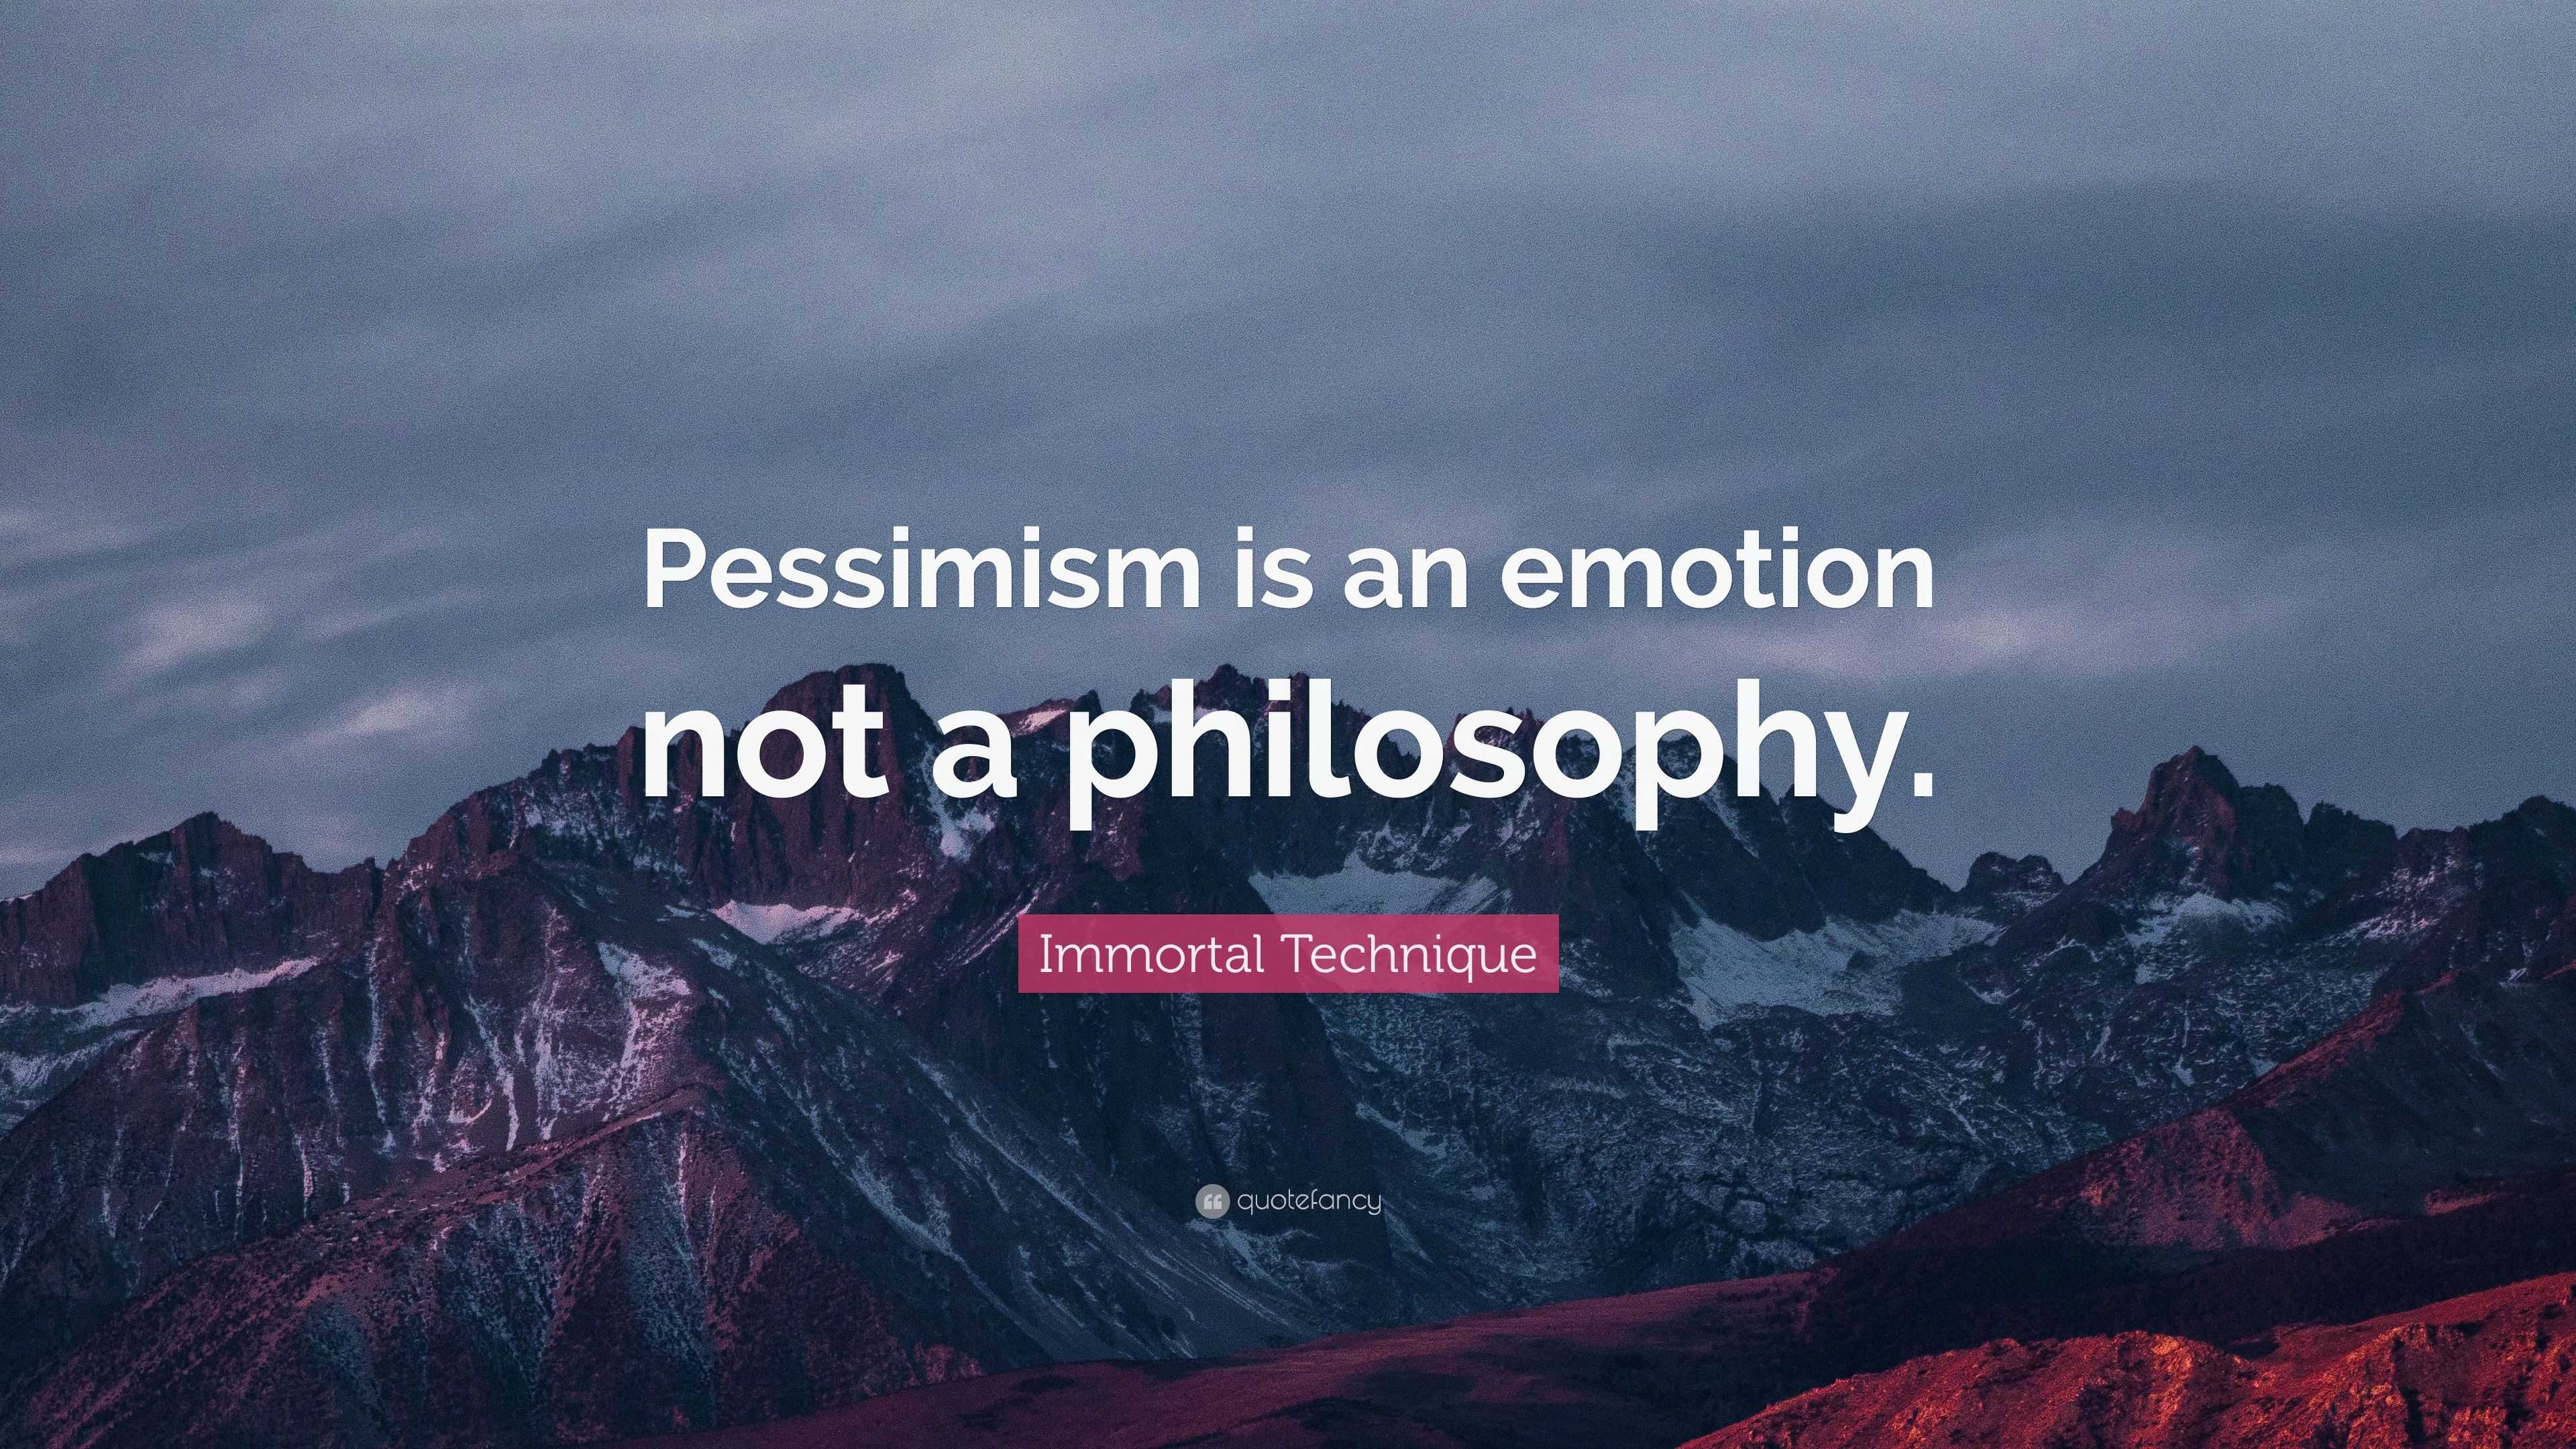 Immortal Technique Quote: "Pessimism is an emotion not a ...